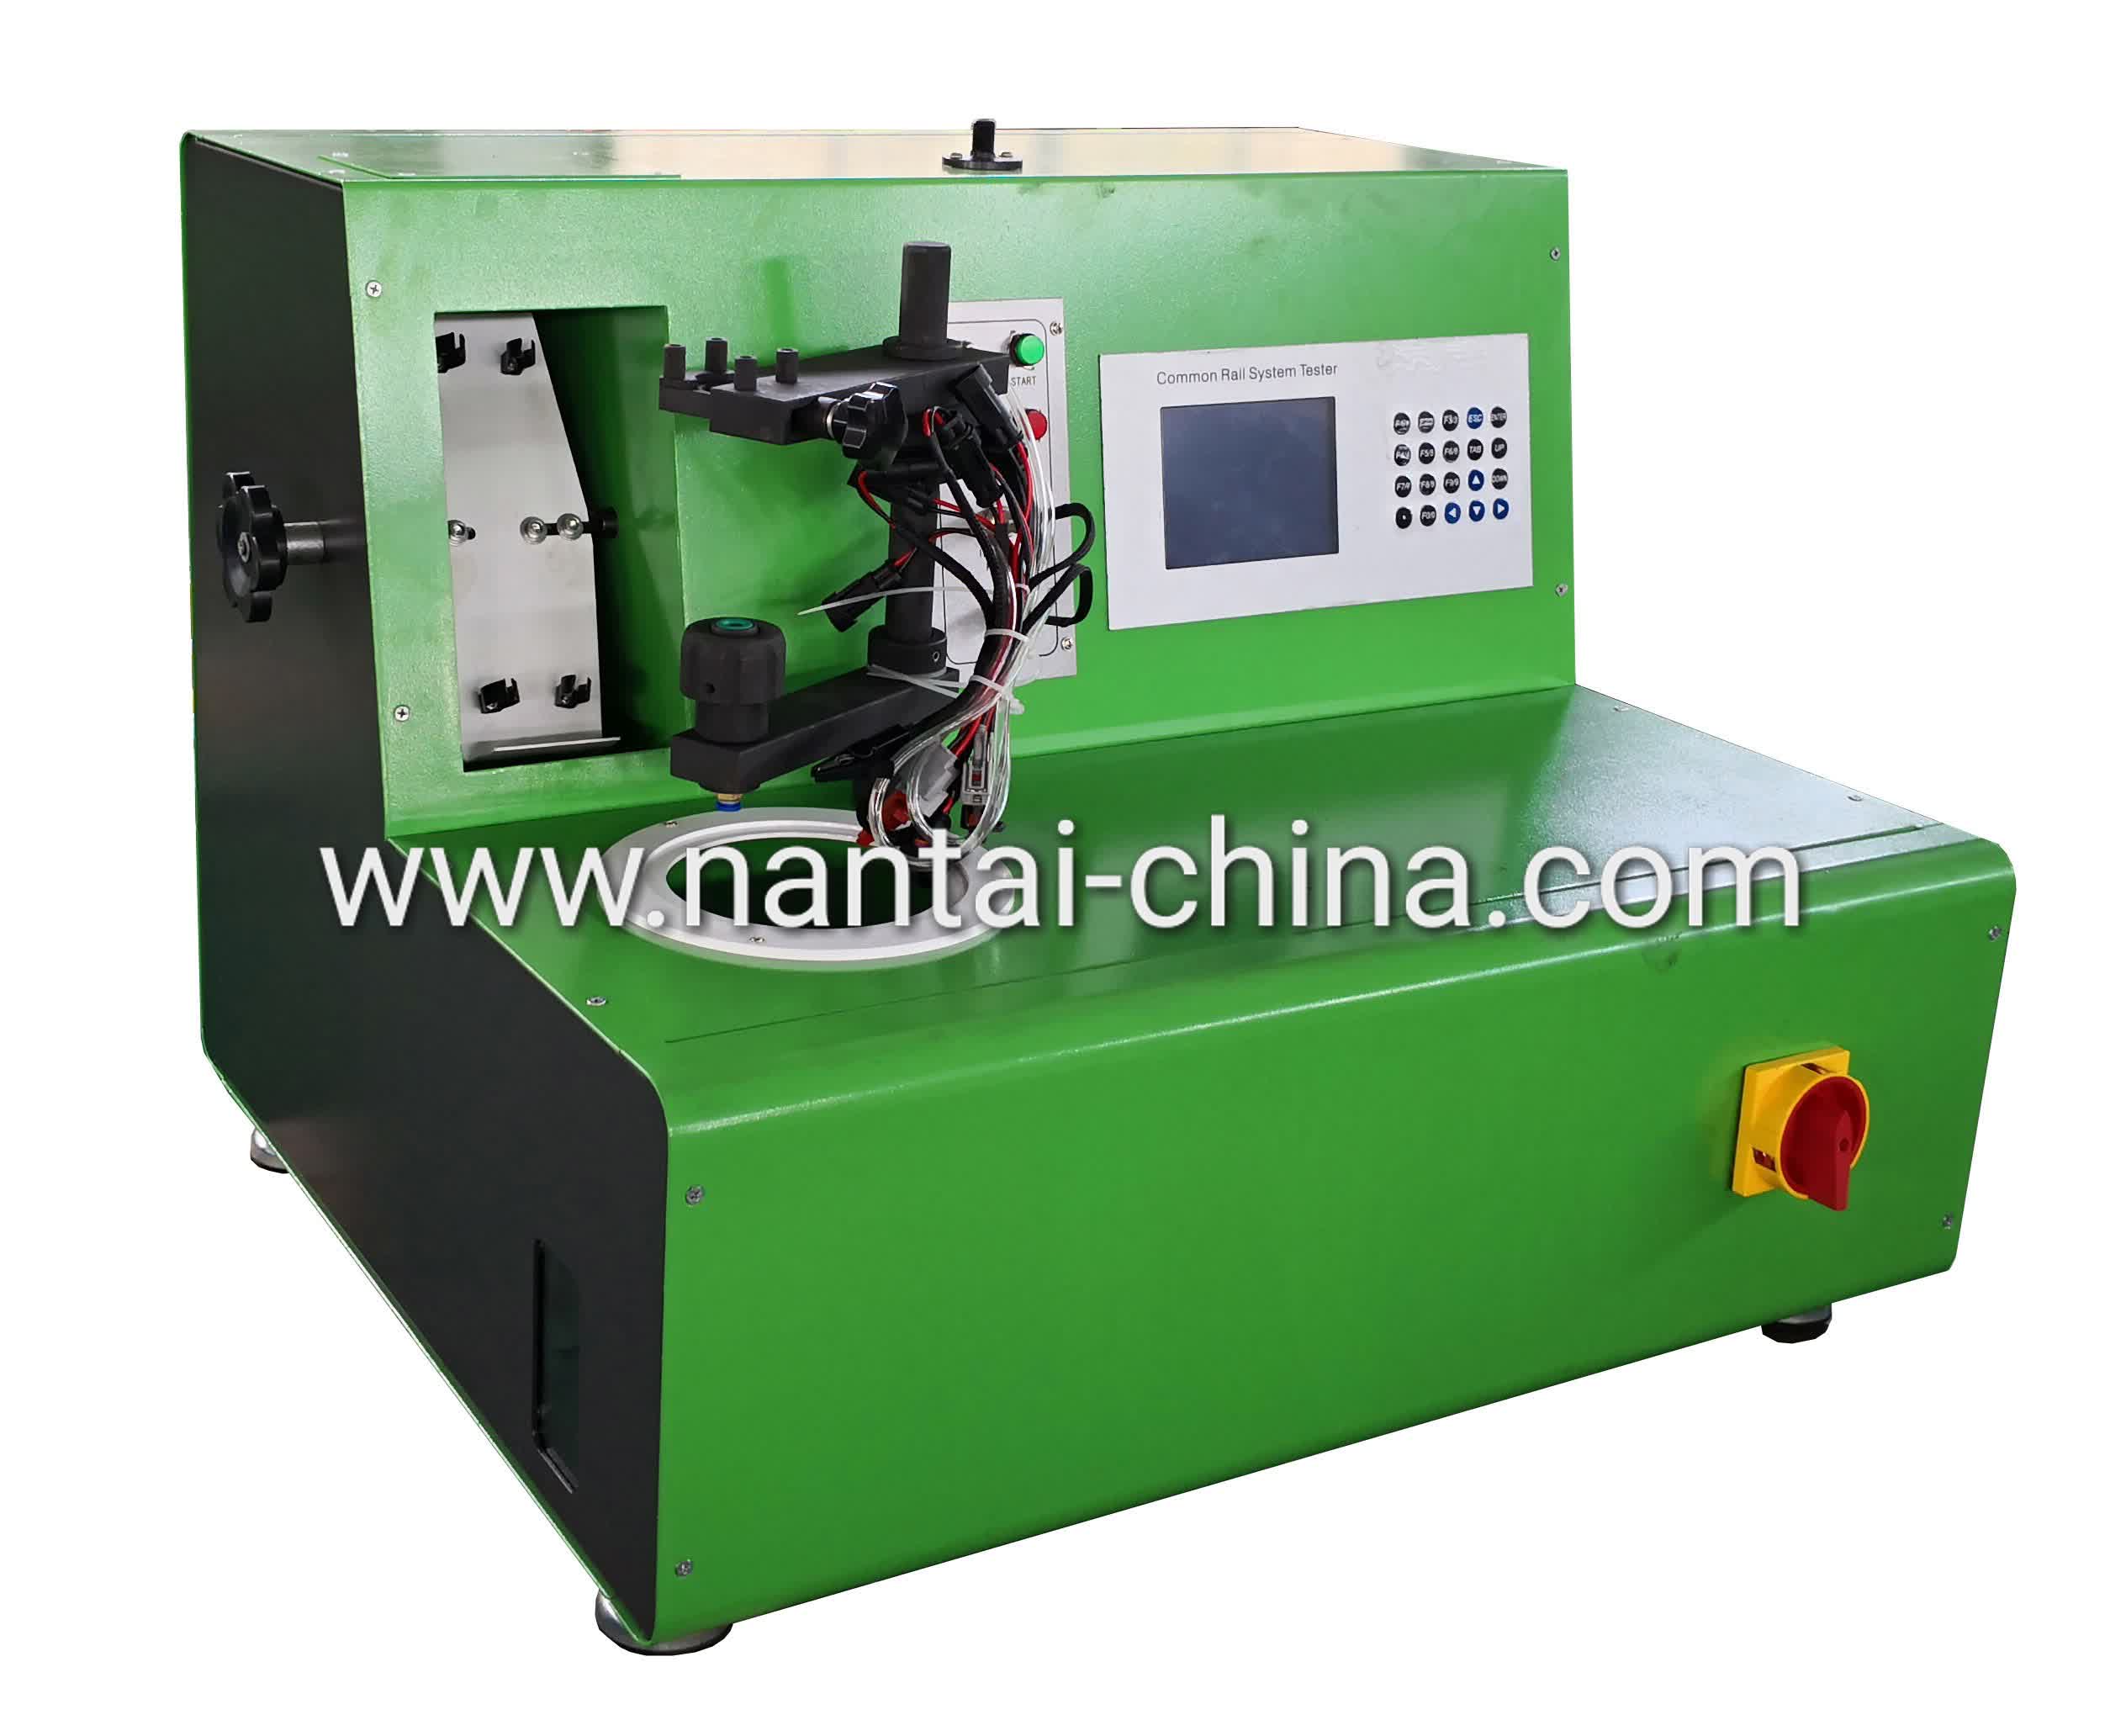 NTS100 Common Rail Injector Test Bench